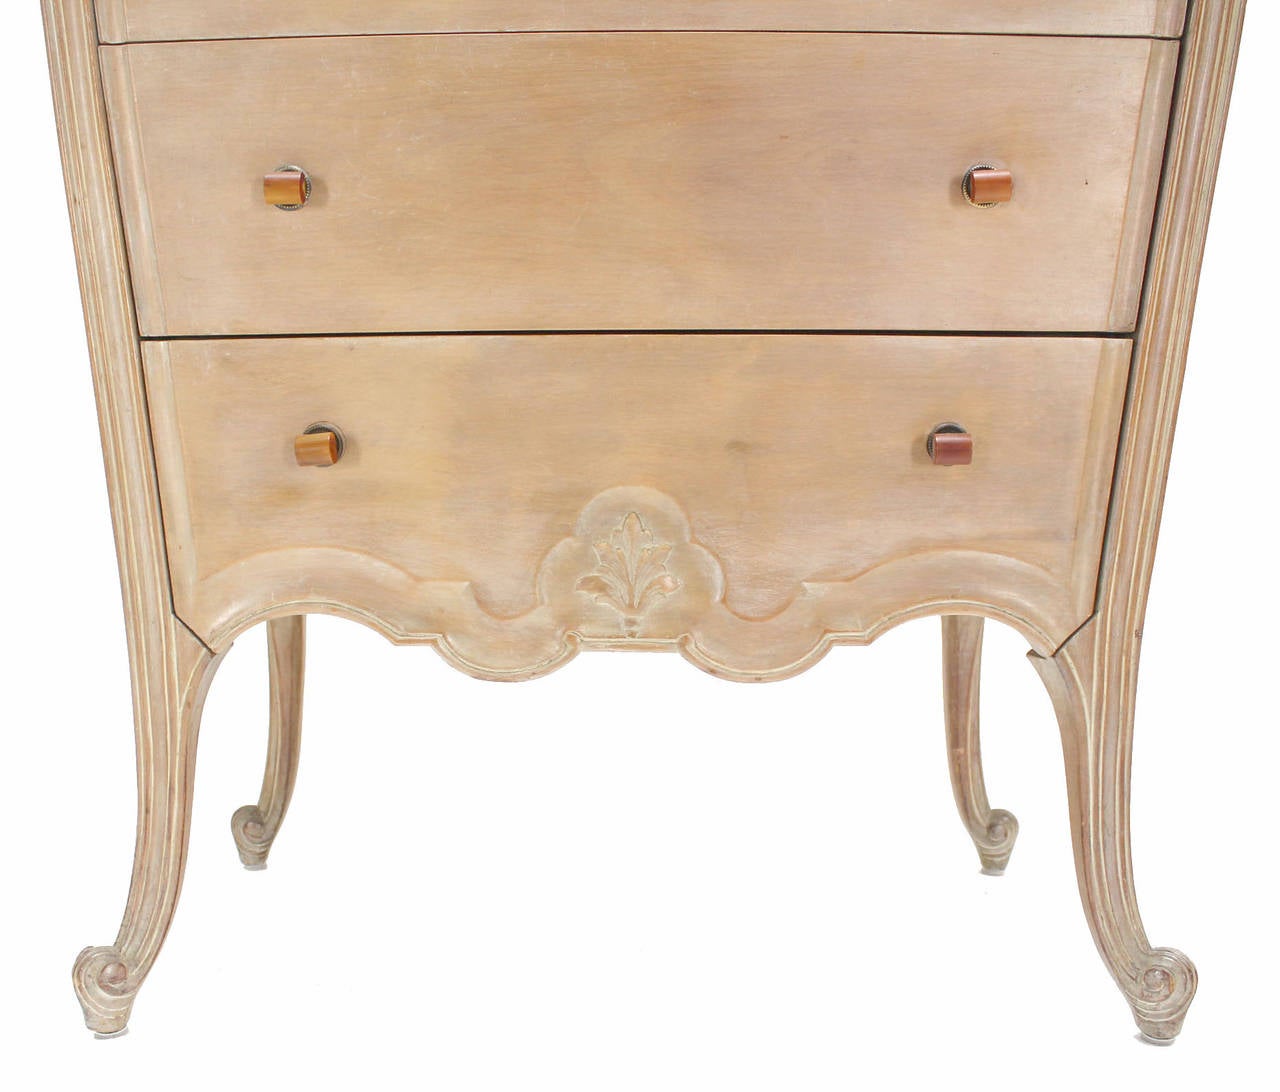 Bleached Carved Bombay High Chest Dresser with Bakelite Pulls on High Legs, circa 1930s